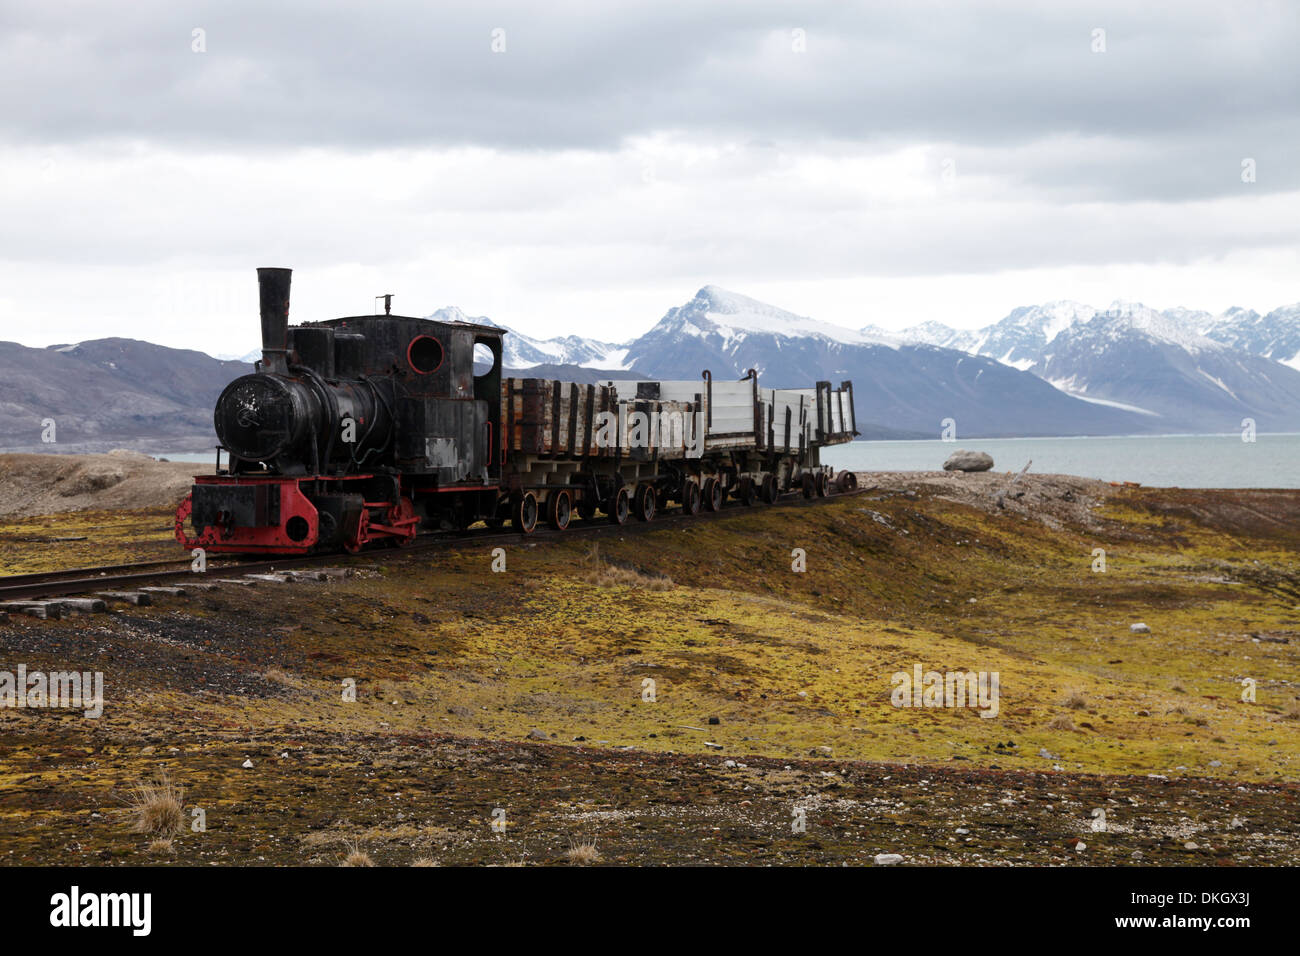 Coal trucks and locomotive preserved as a monument at Ny Alesund, Svalbard, Norway, Scandinavia, Europe Stock Photo